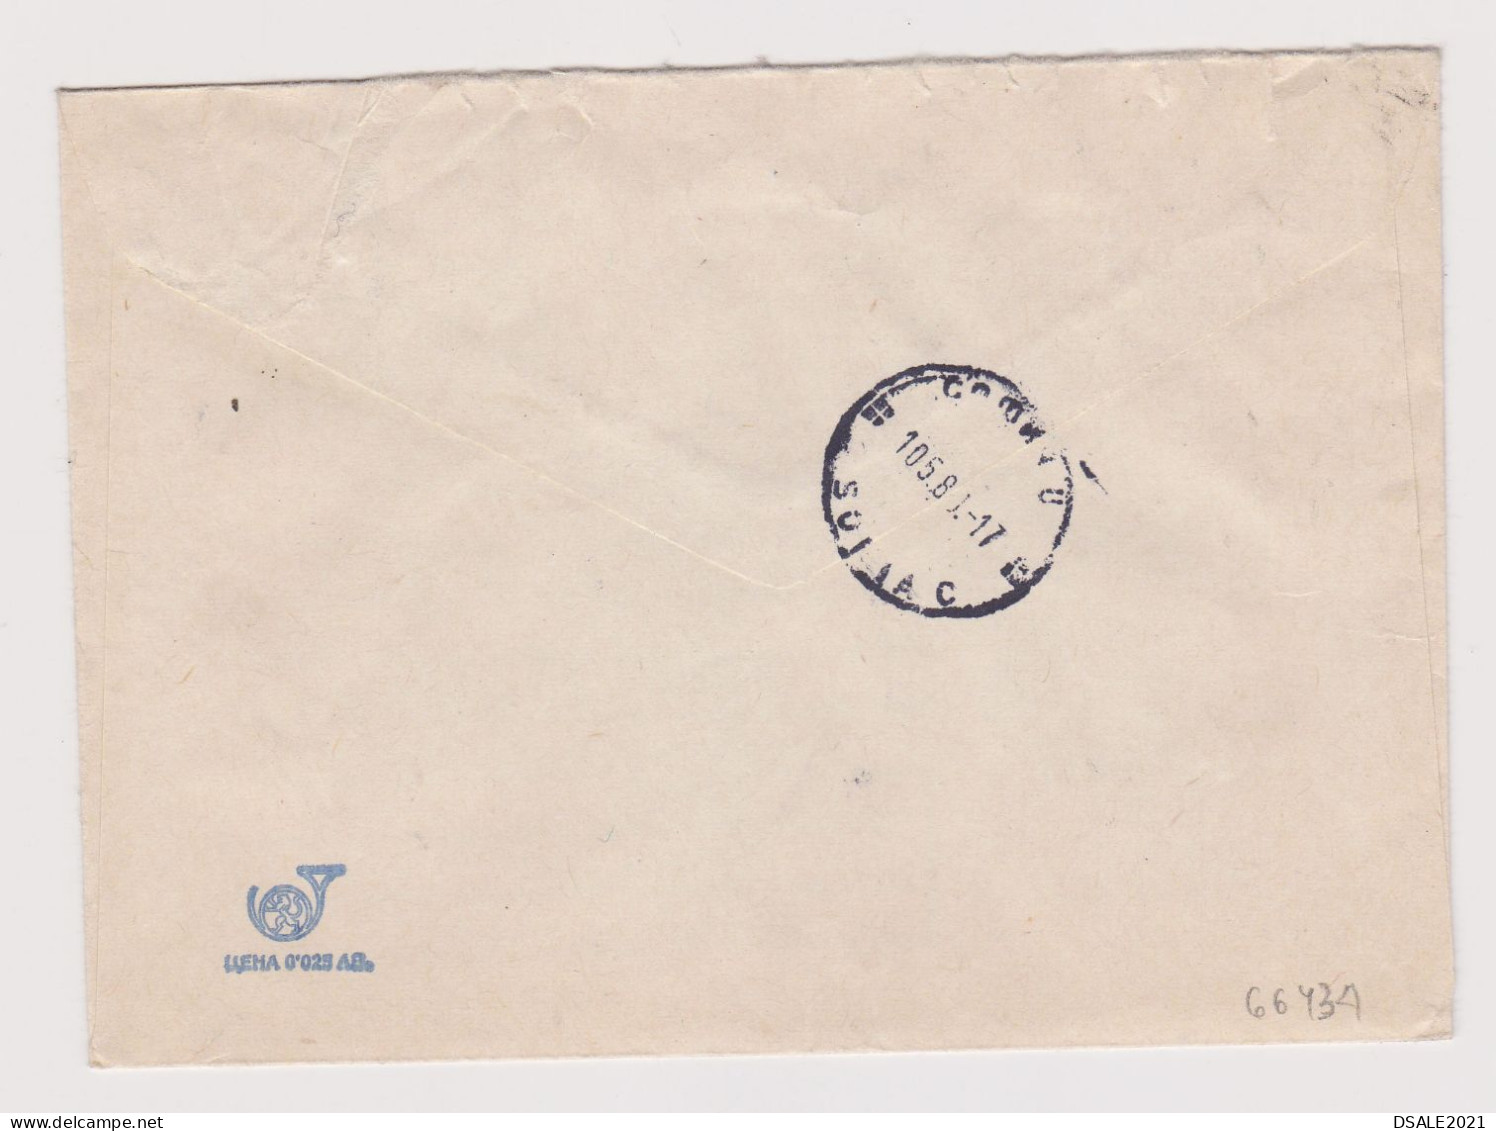 Bulgaria Bulgarien Bulgarie 1980 Postal Stationery Cover PSE, Entier, Registered With Color Topic Stamps (66434) - Enveloppes